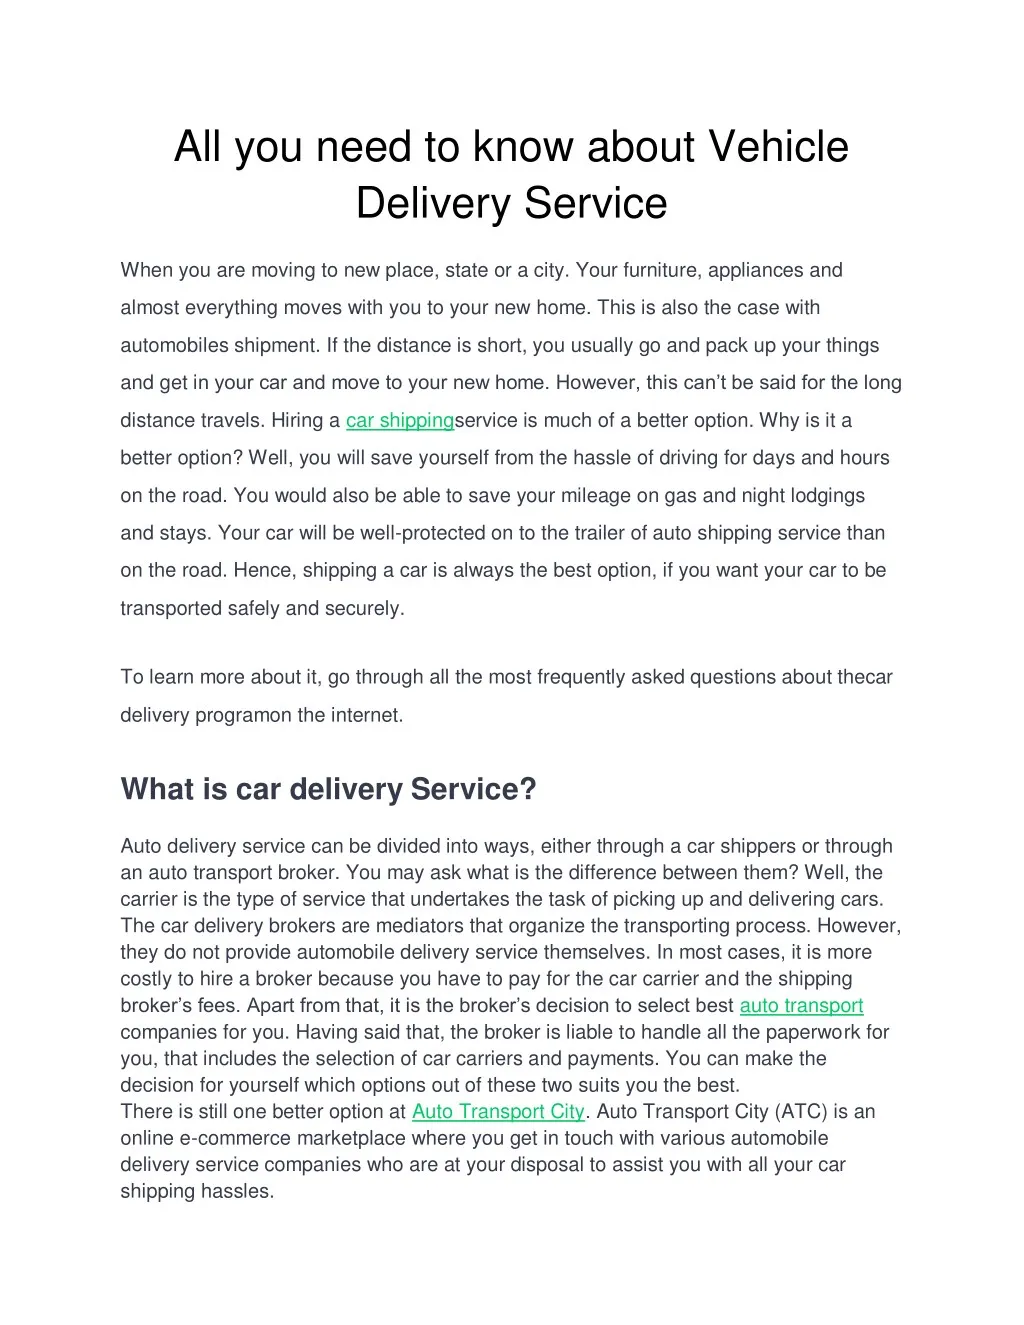 all you need to know about vehicle delivery